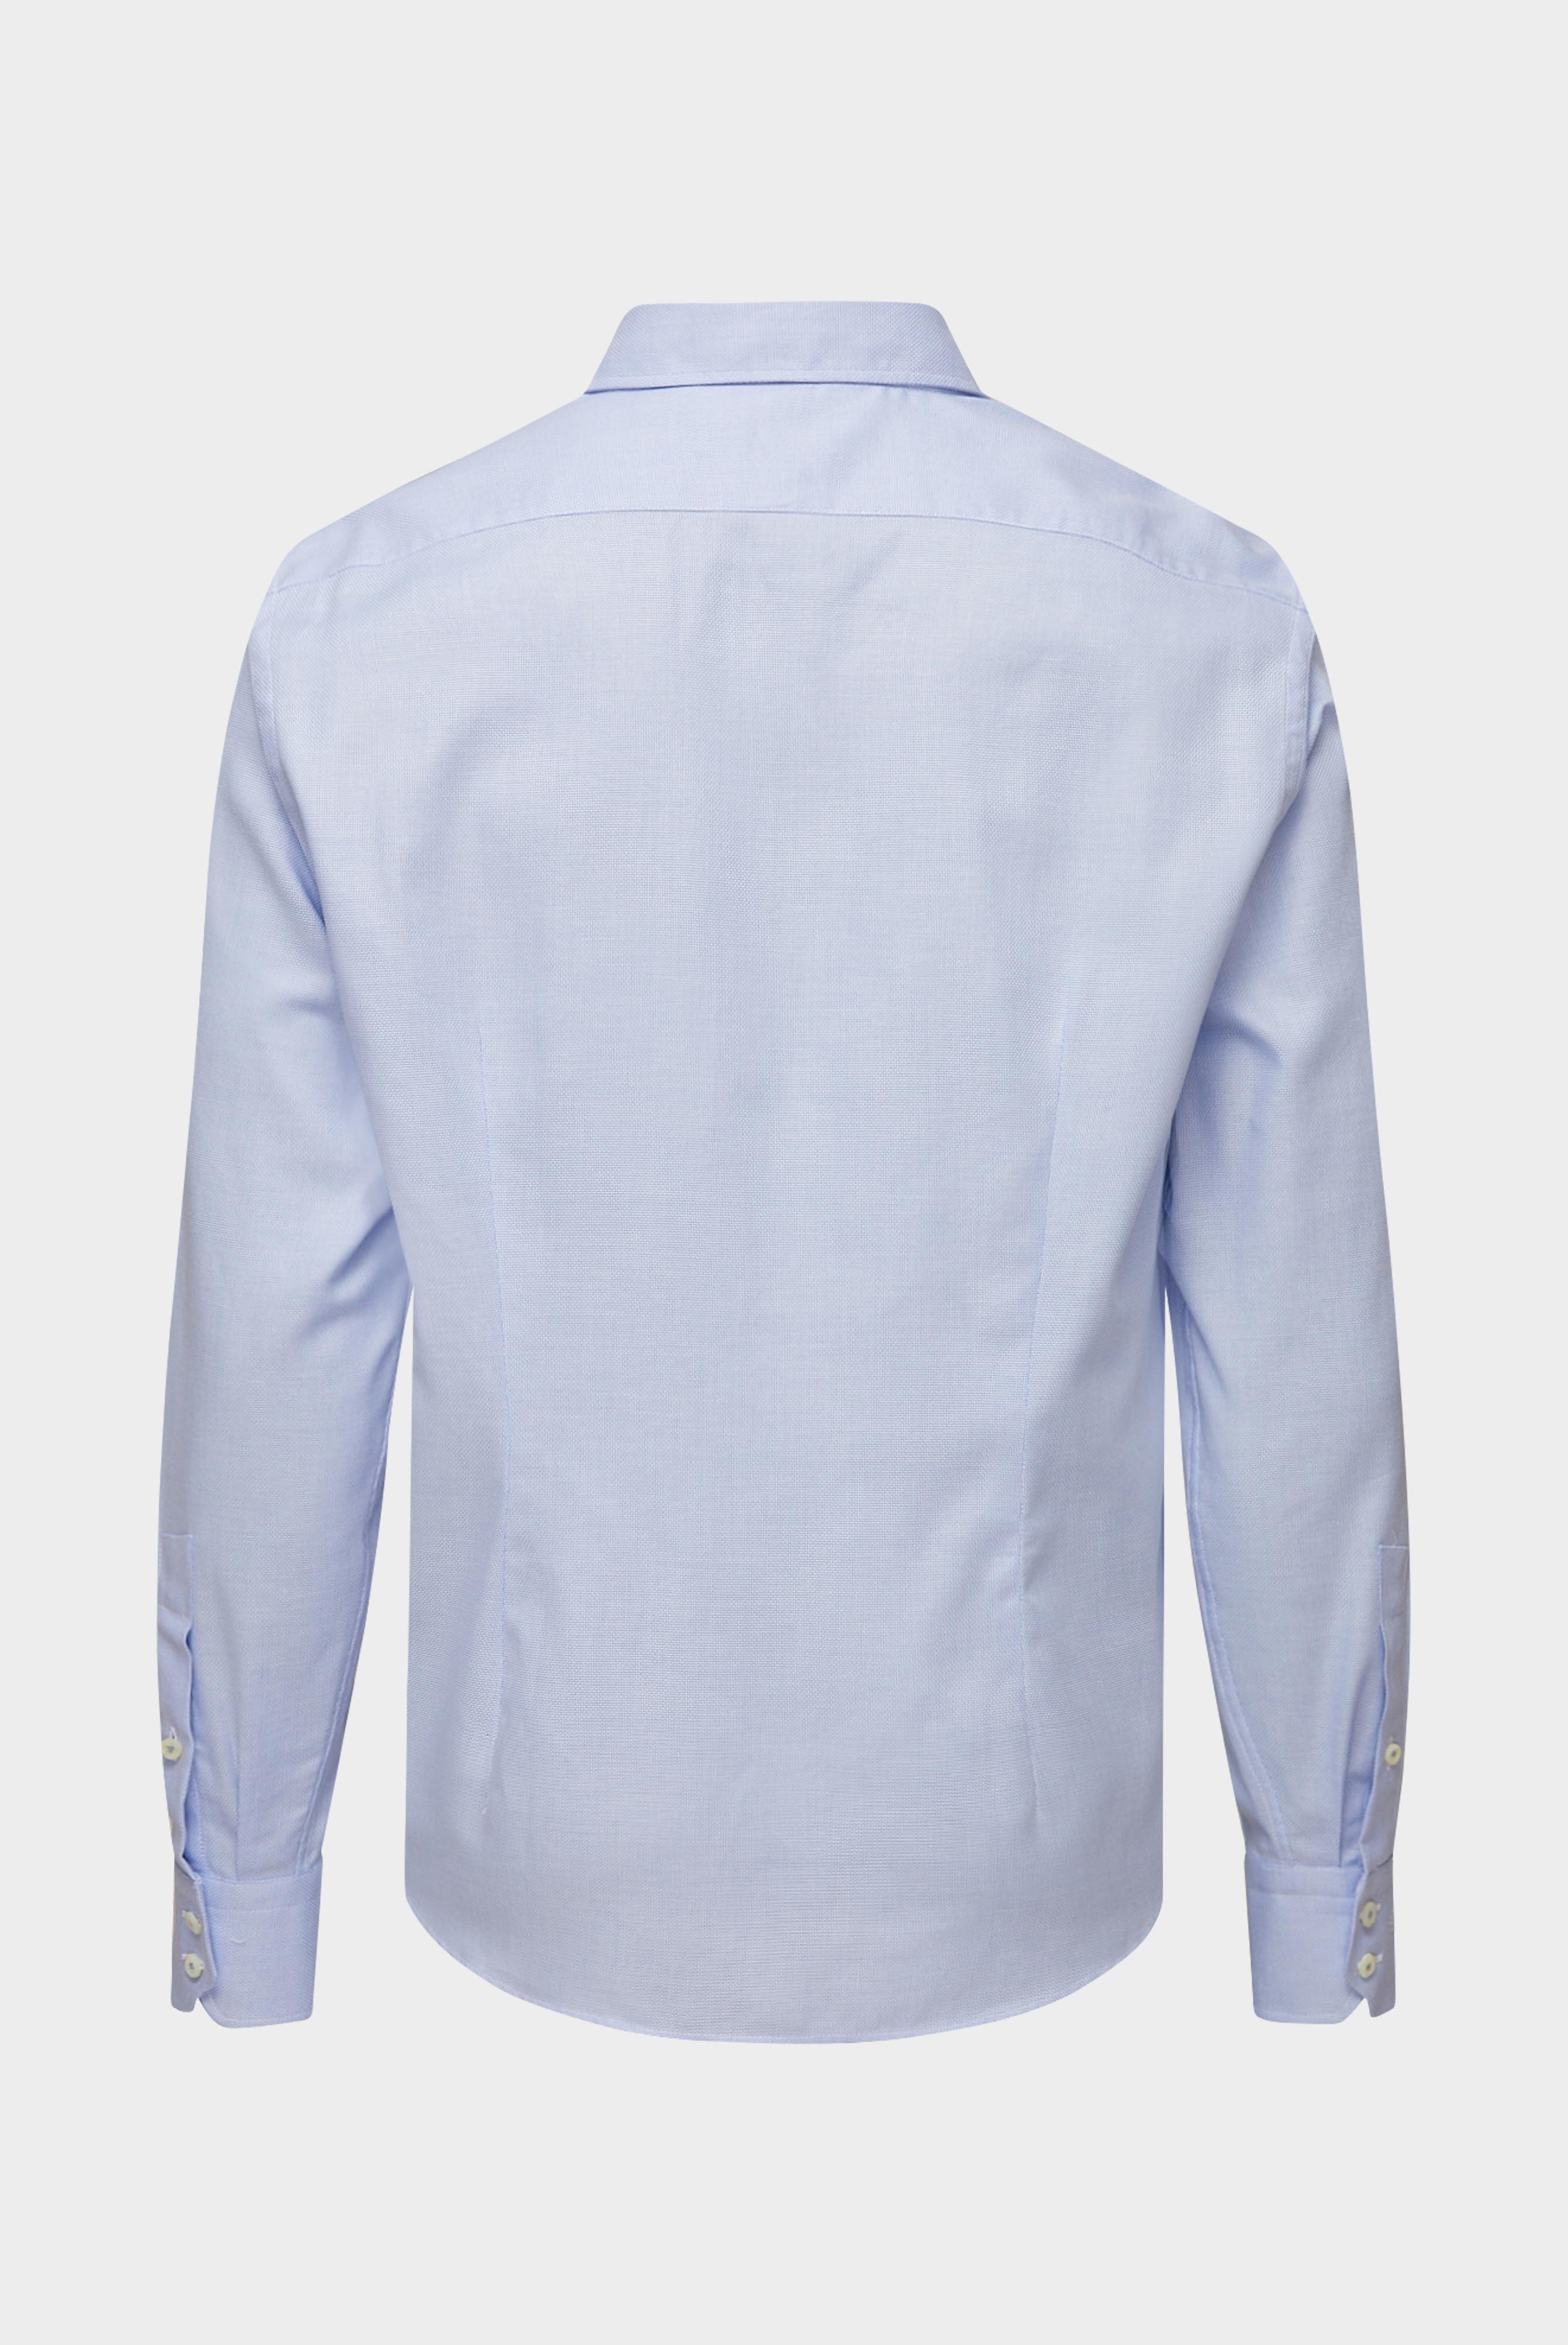 Business Shirts+Business shirt made of dobby cotton+20.3283.NV.161680.730.40